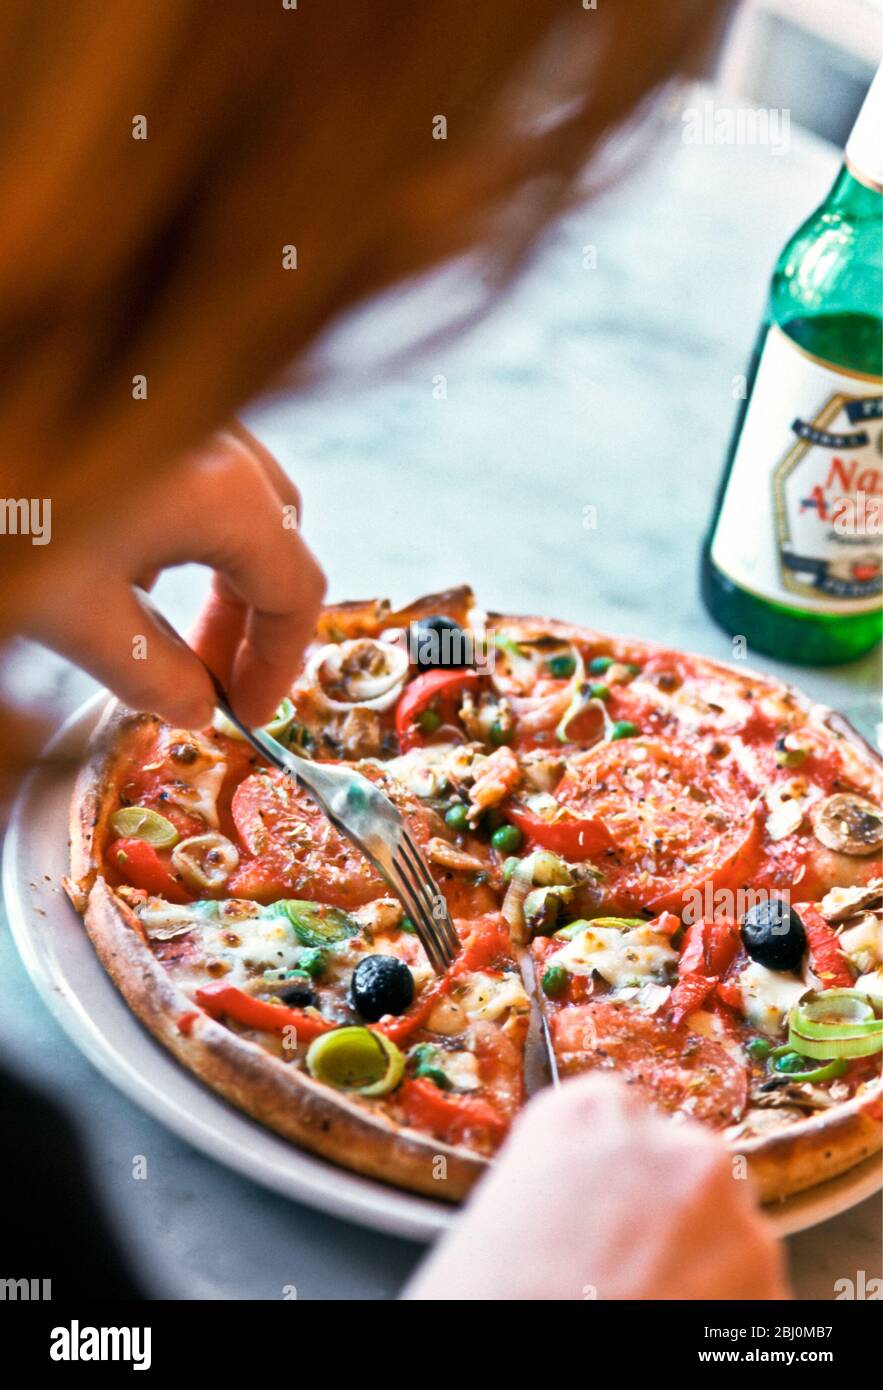 Eating pizza in Pizza Express restaurant, with bottle of Nastro Azzuro beer. - Stock Photo